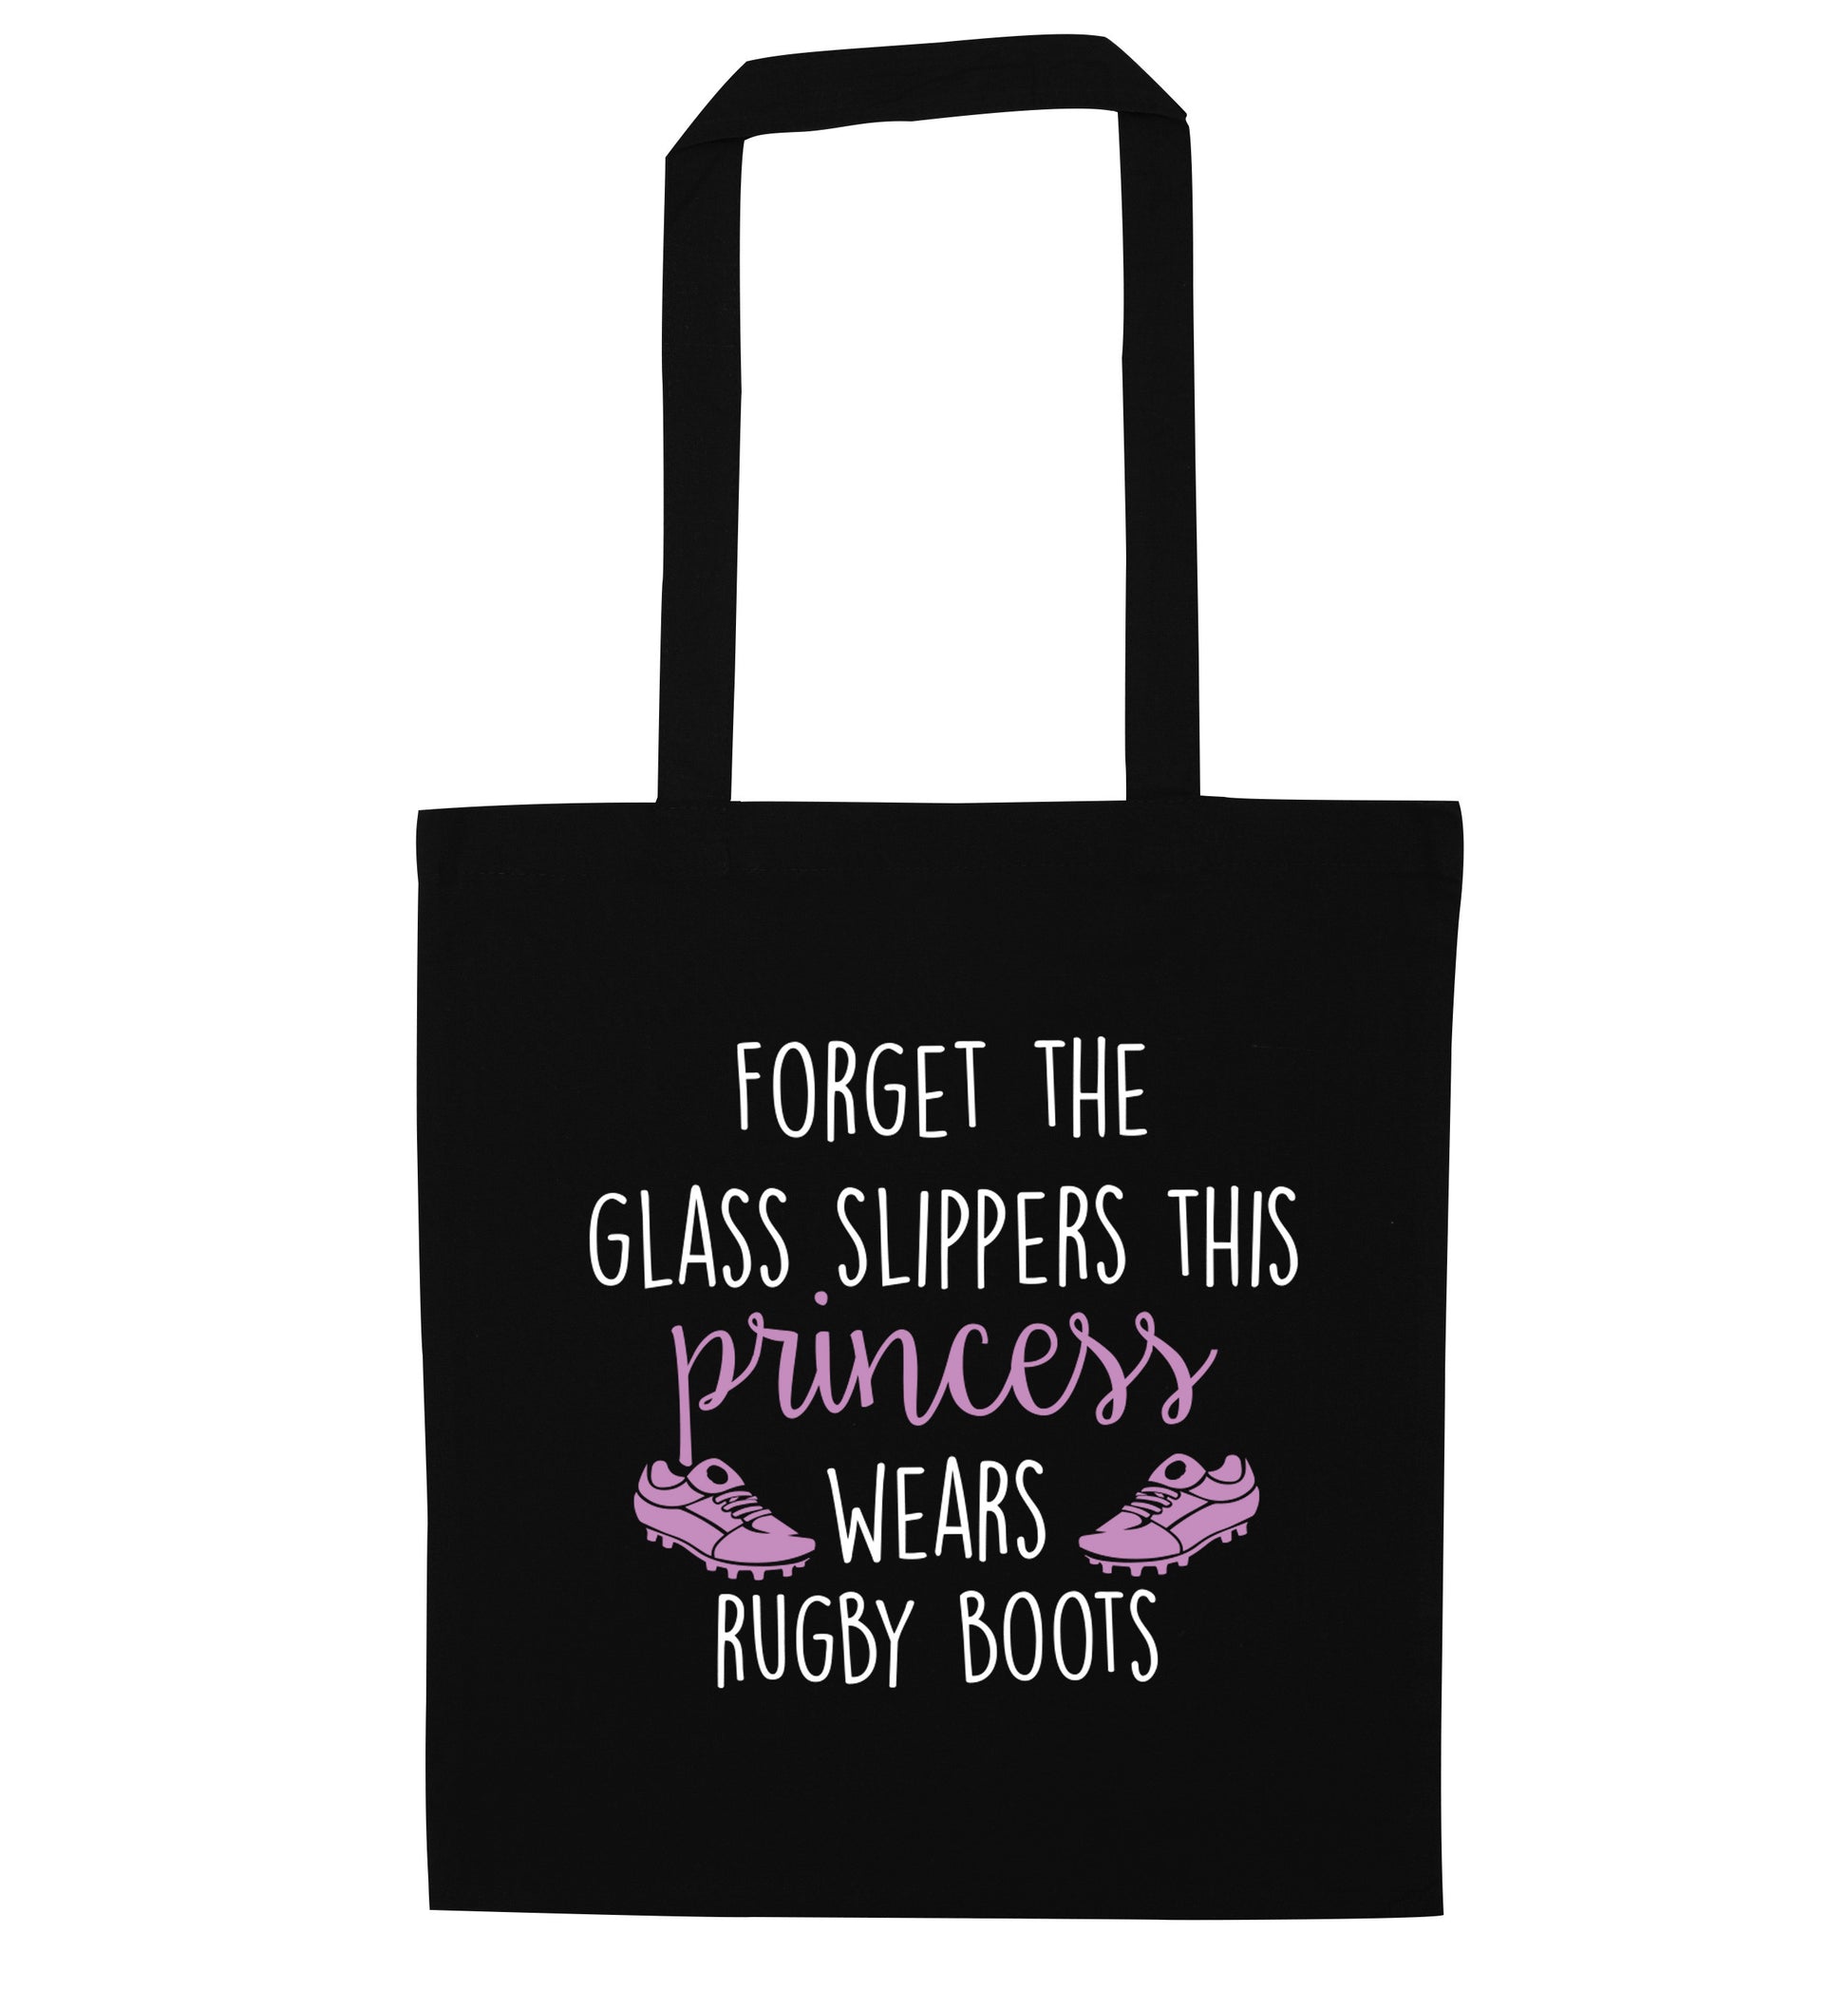 Forget the glass slippers this princess wears rugby boots black tote bag